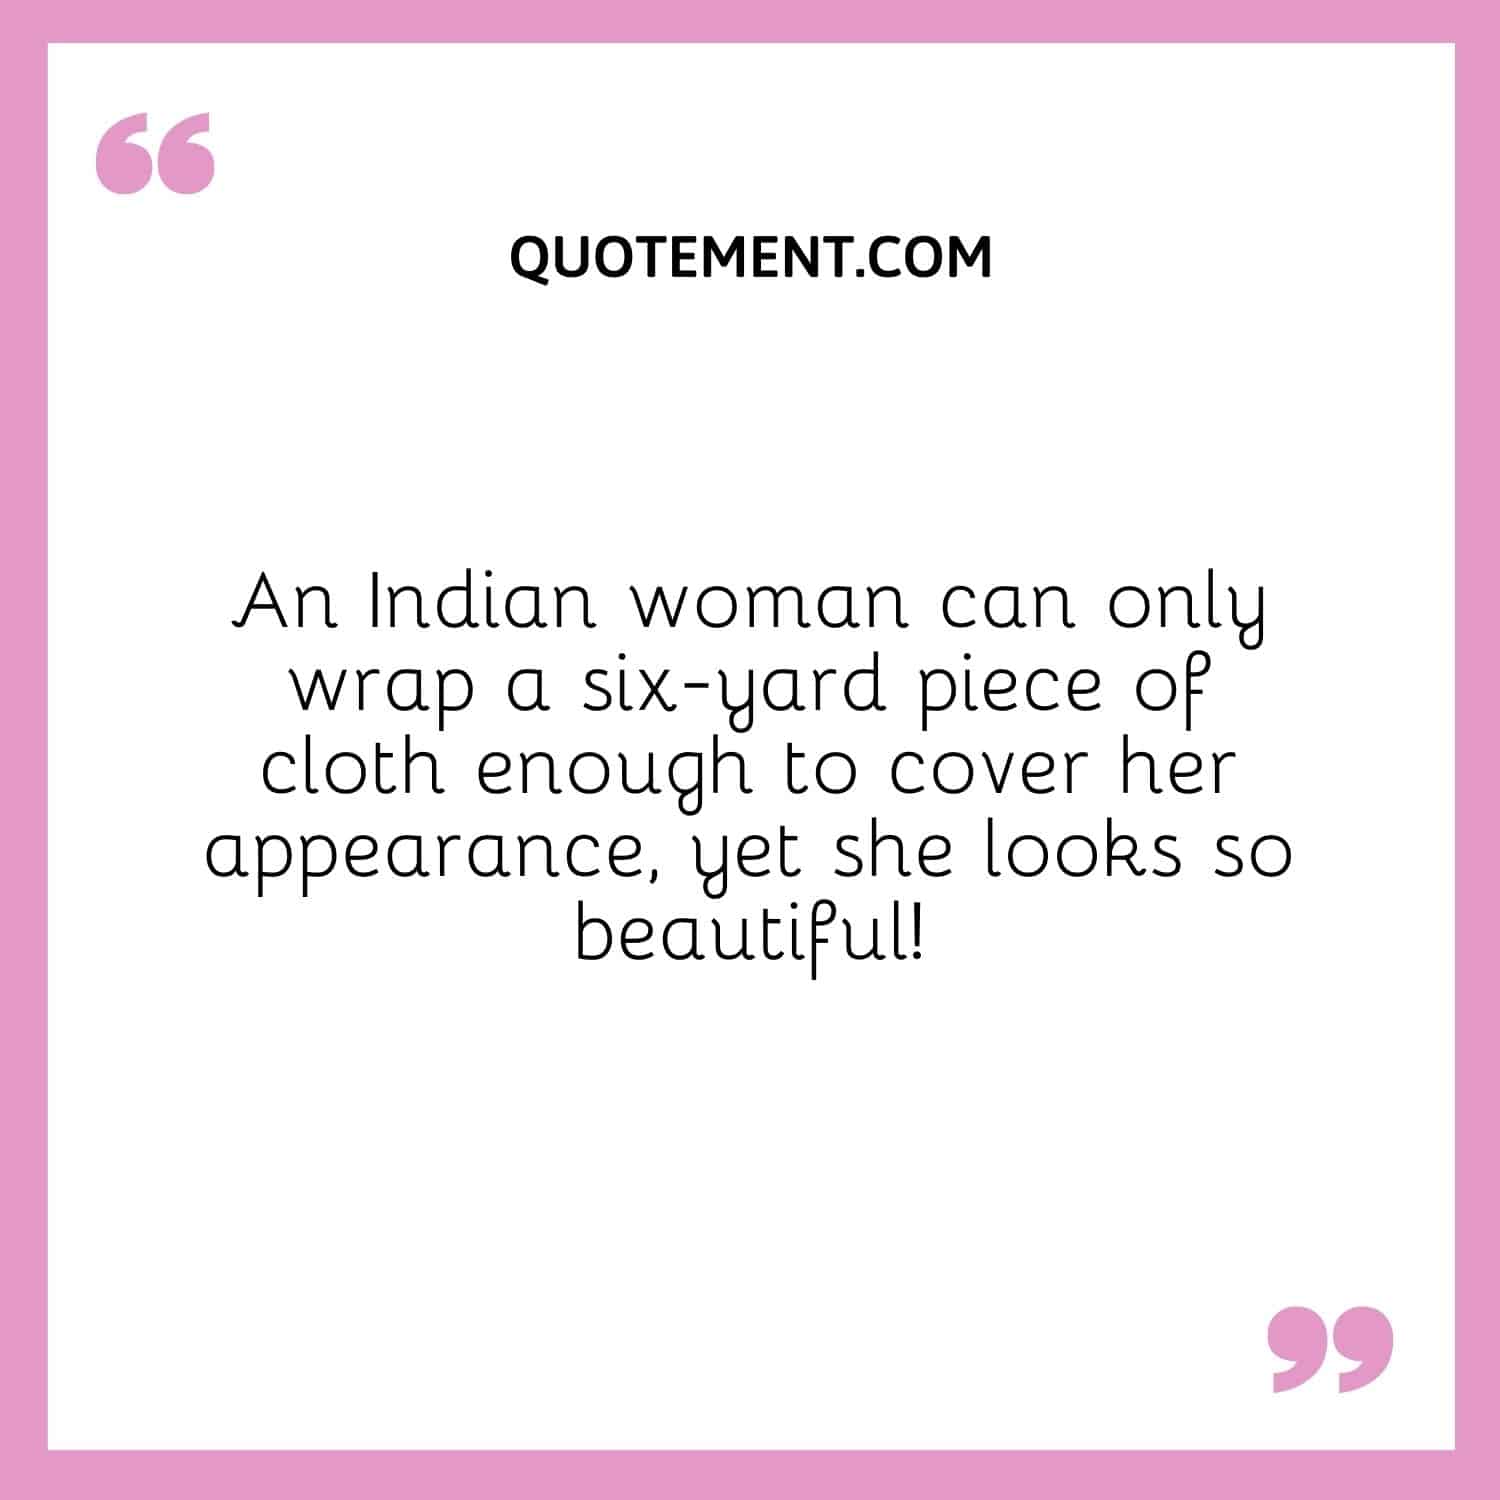 An Indian woman can only wrap a six-yard piece of cloth enough to cover her appearance, yet she looks so beautiful!